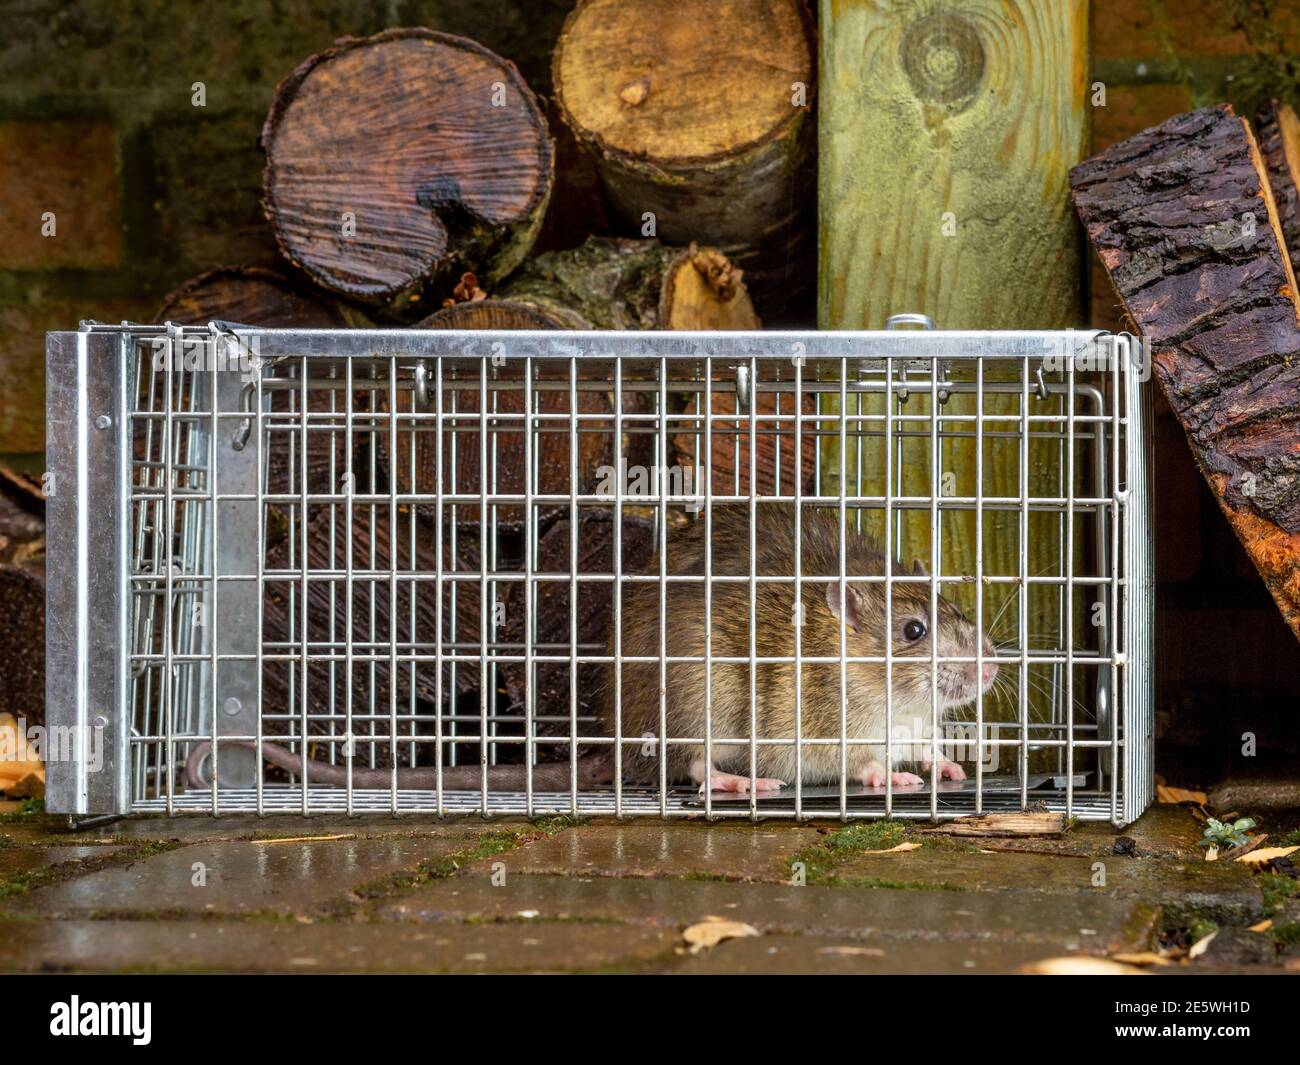 https://c8.alamy.com/comp/2E5WH1D/rat-trapped-in-humane-trap-in-garden-with-logs-in-background-2E5WH1D.jpg